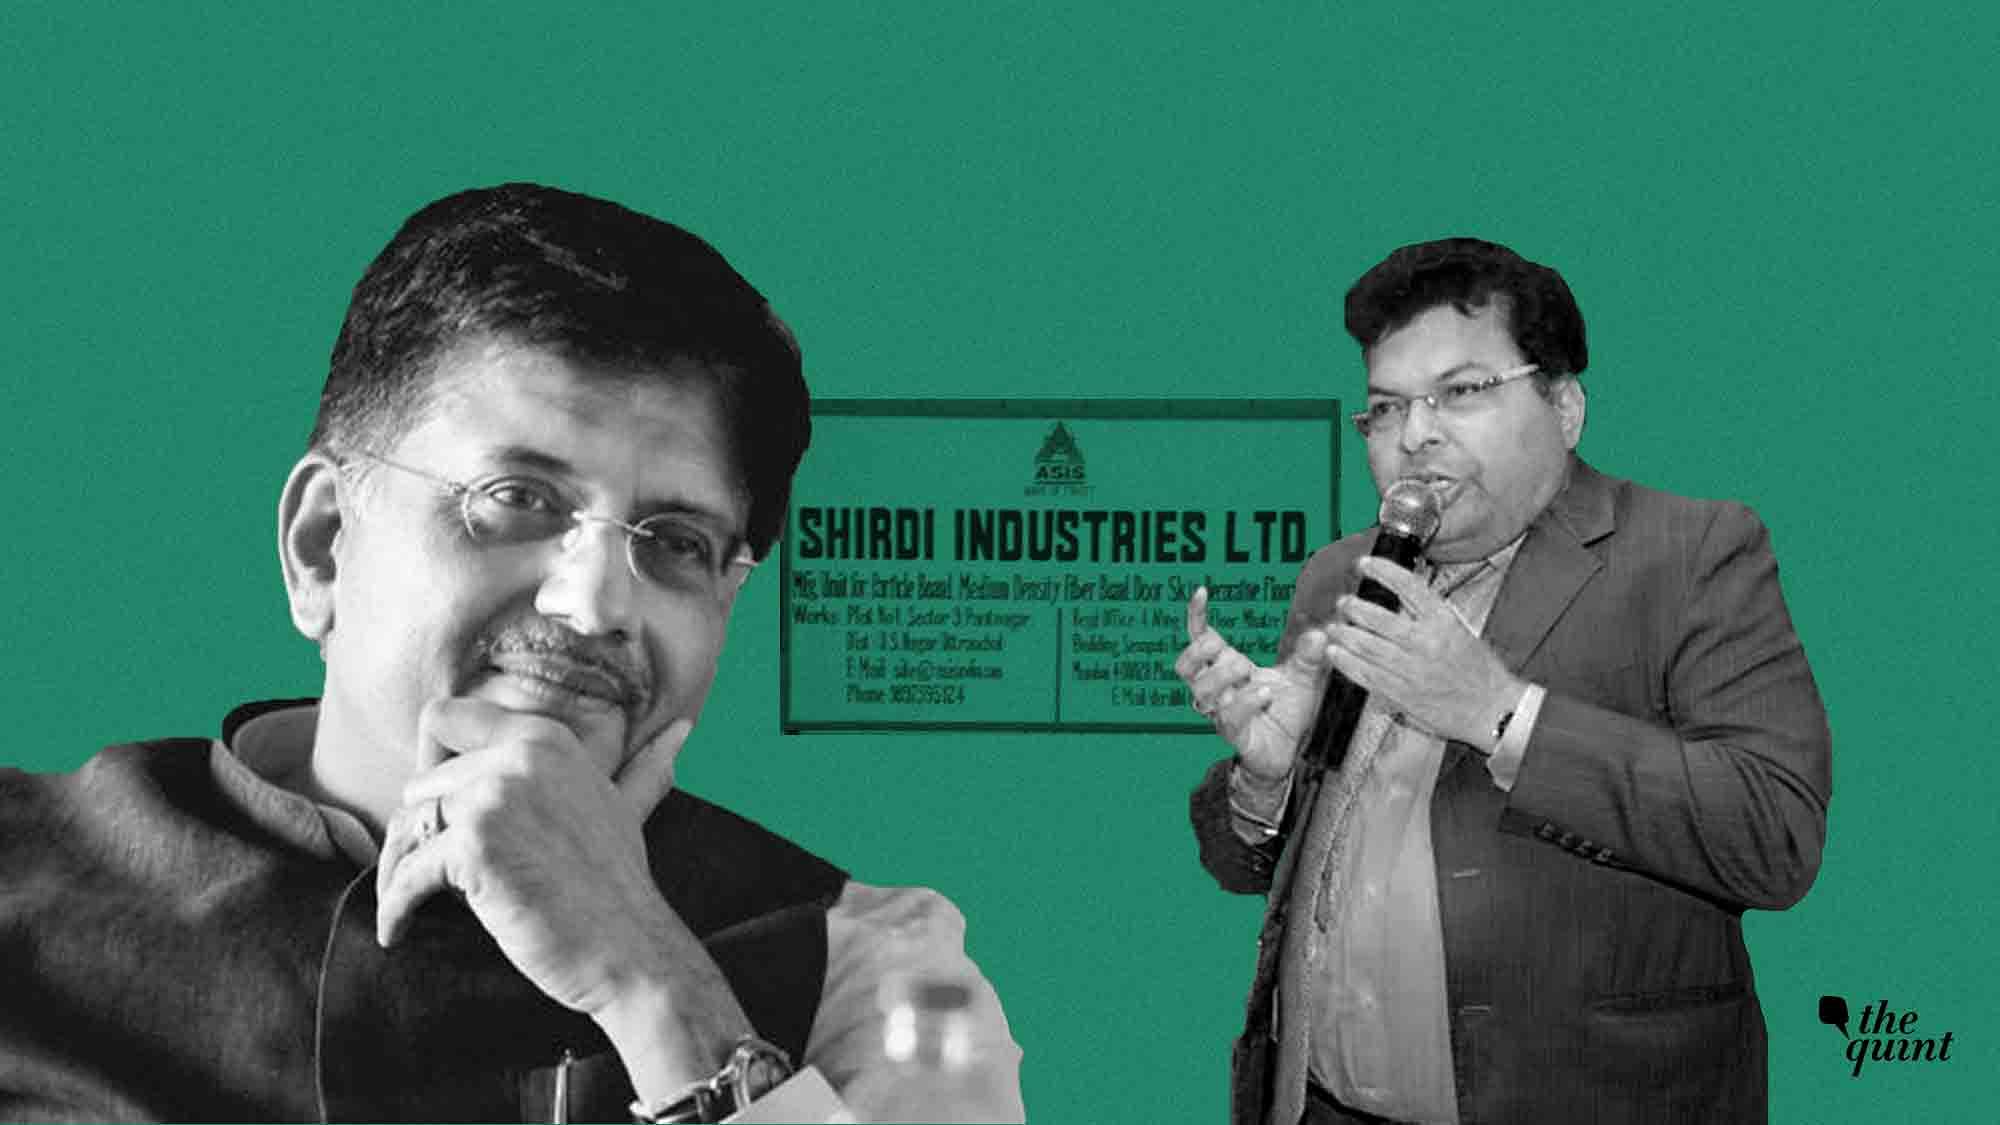 Piyush Goyal has been caught in the eye of a storm as a news report claimed that the company led by the Union minister defaulted on loans.